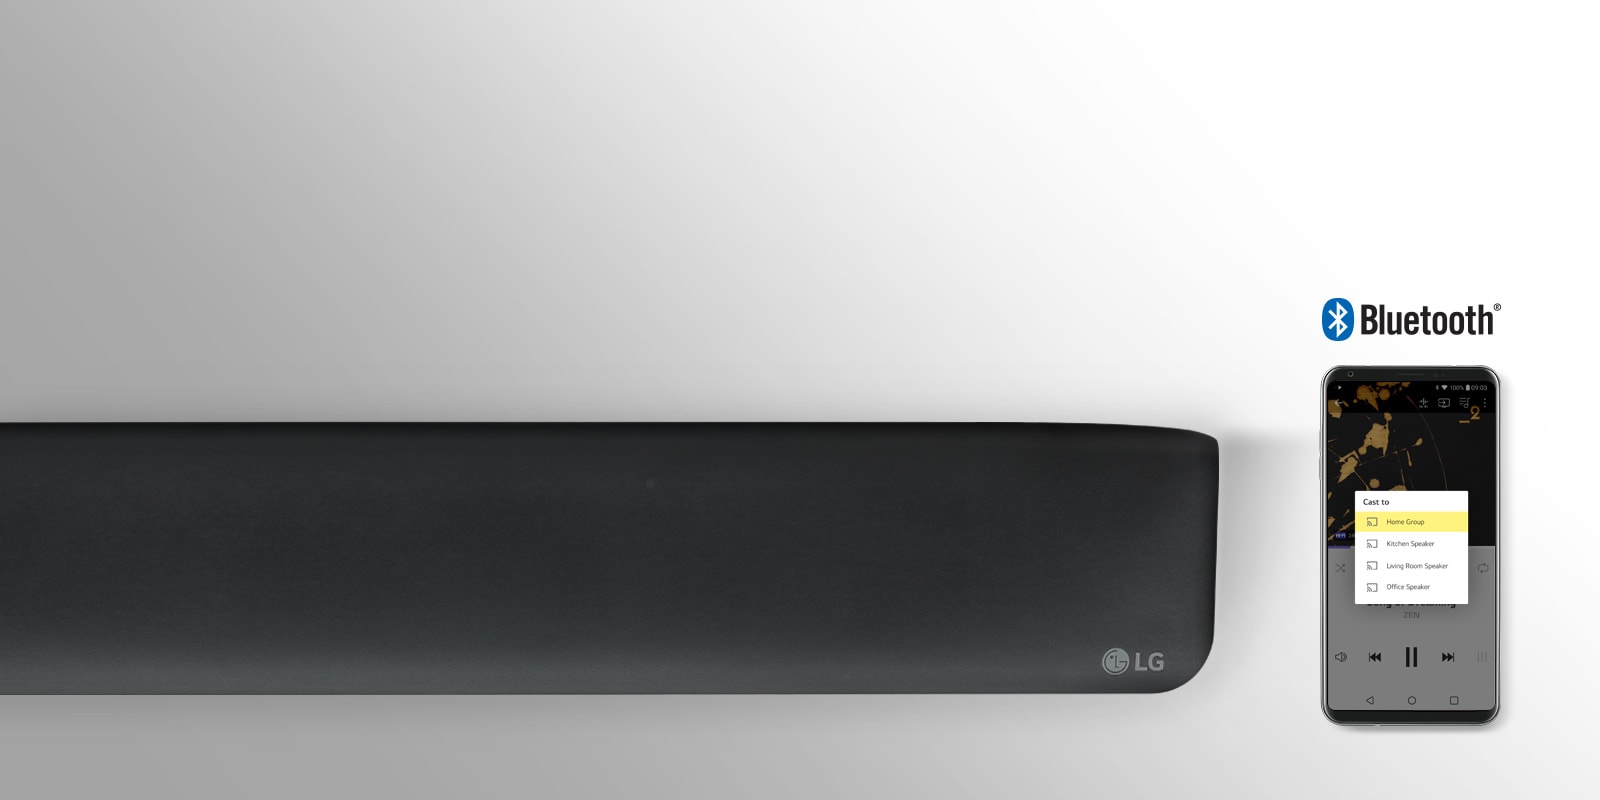  Stand-by, wake up your Sound Bar